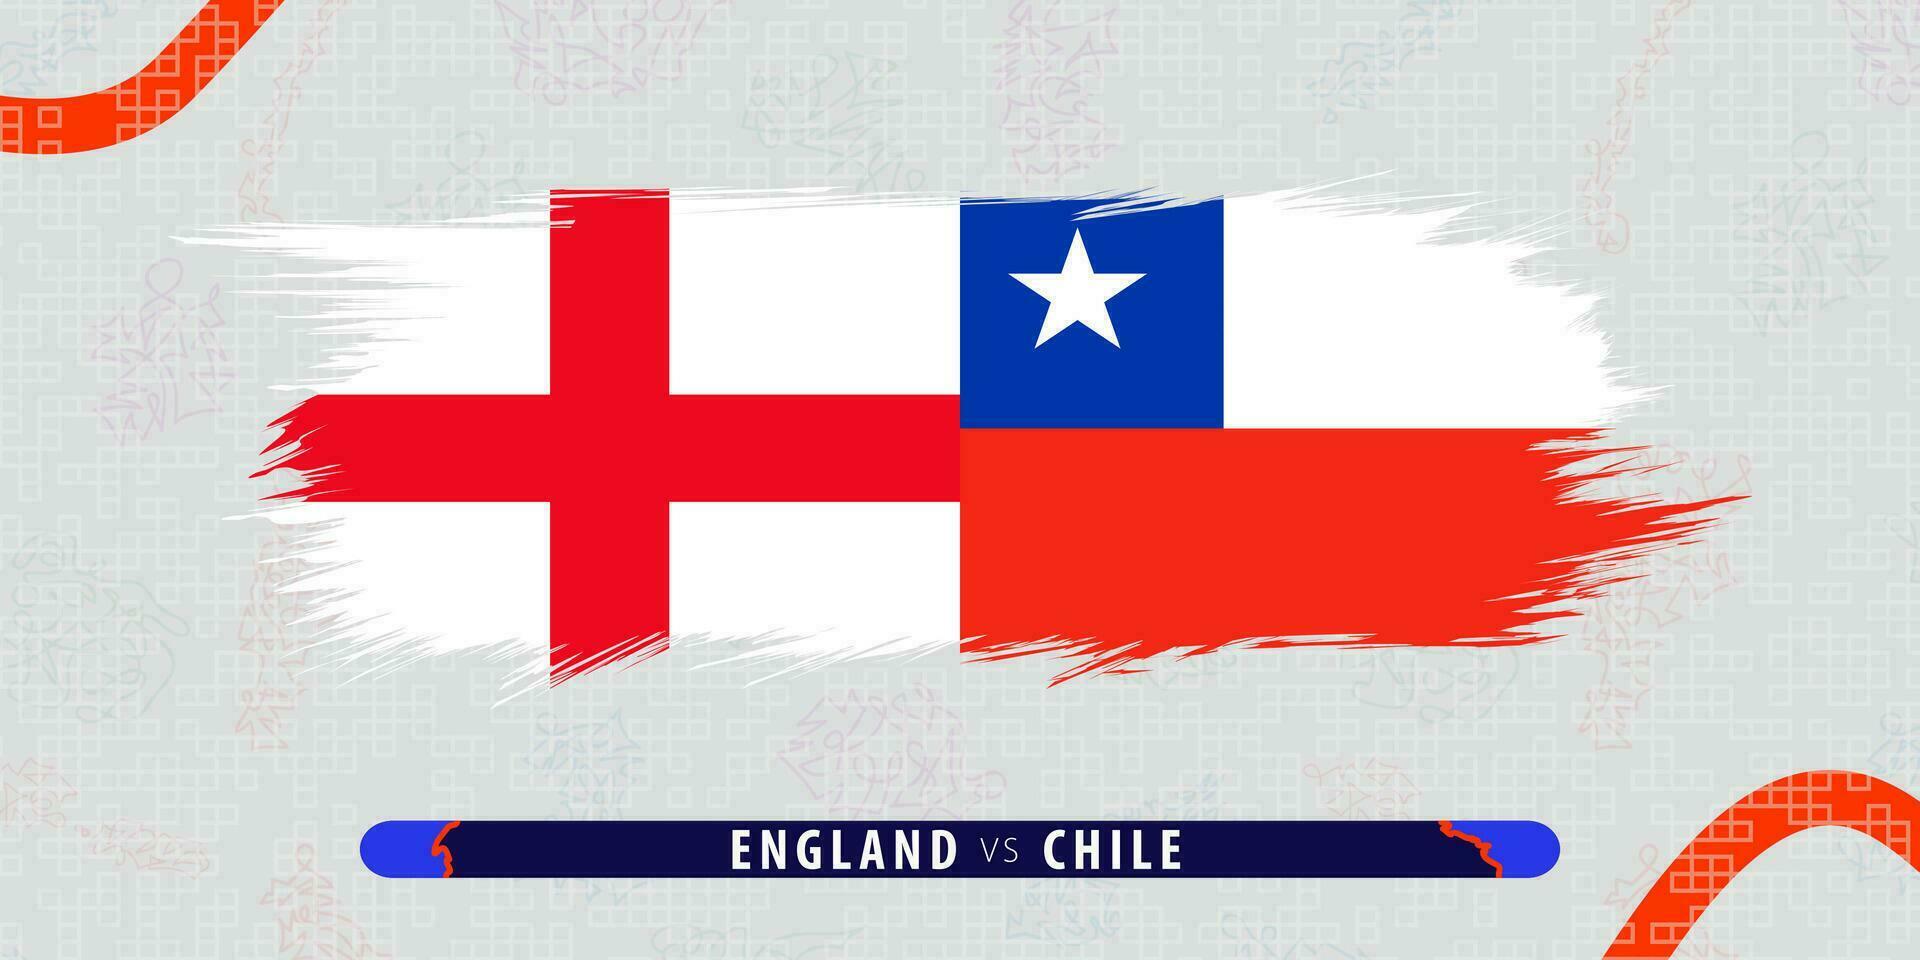 England vs Chile, international rugby match illustration in brushstroke style. Abstract grungy icon for rugby match. vector